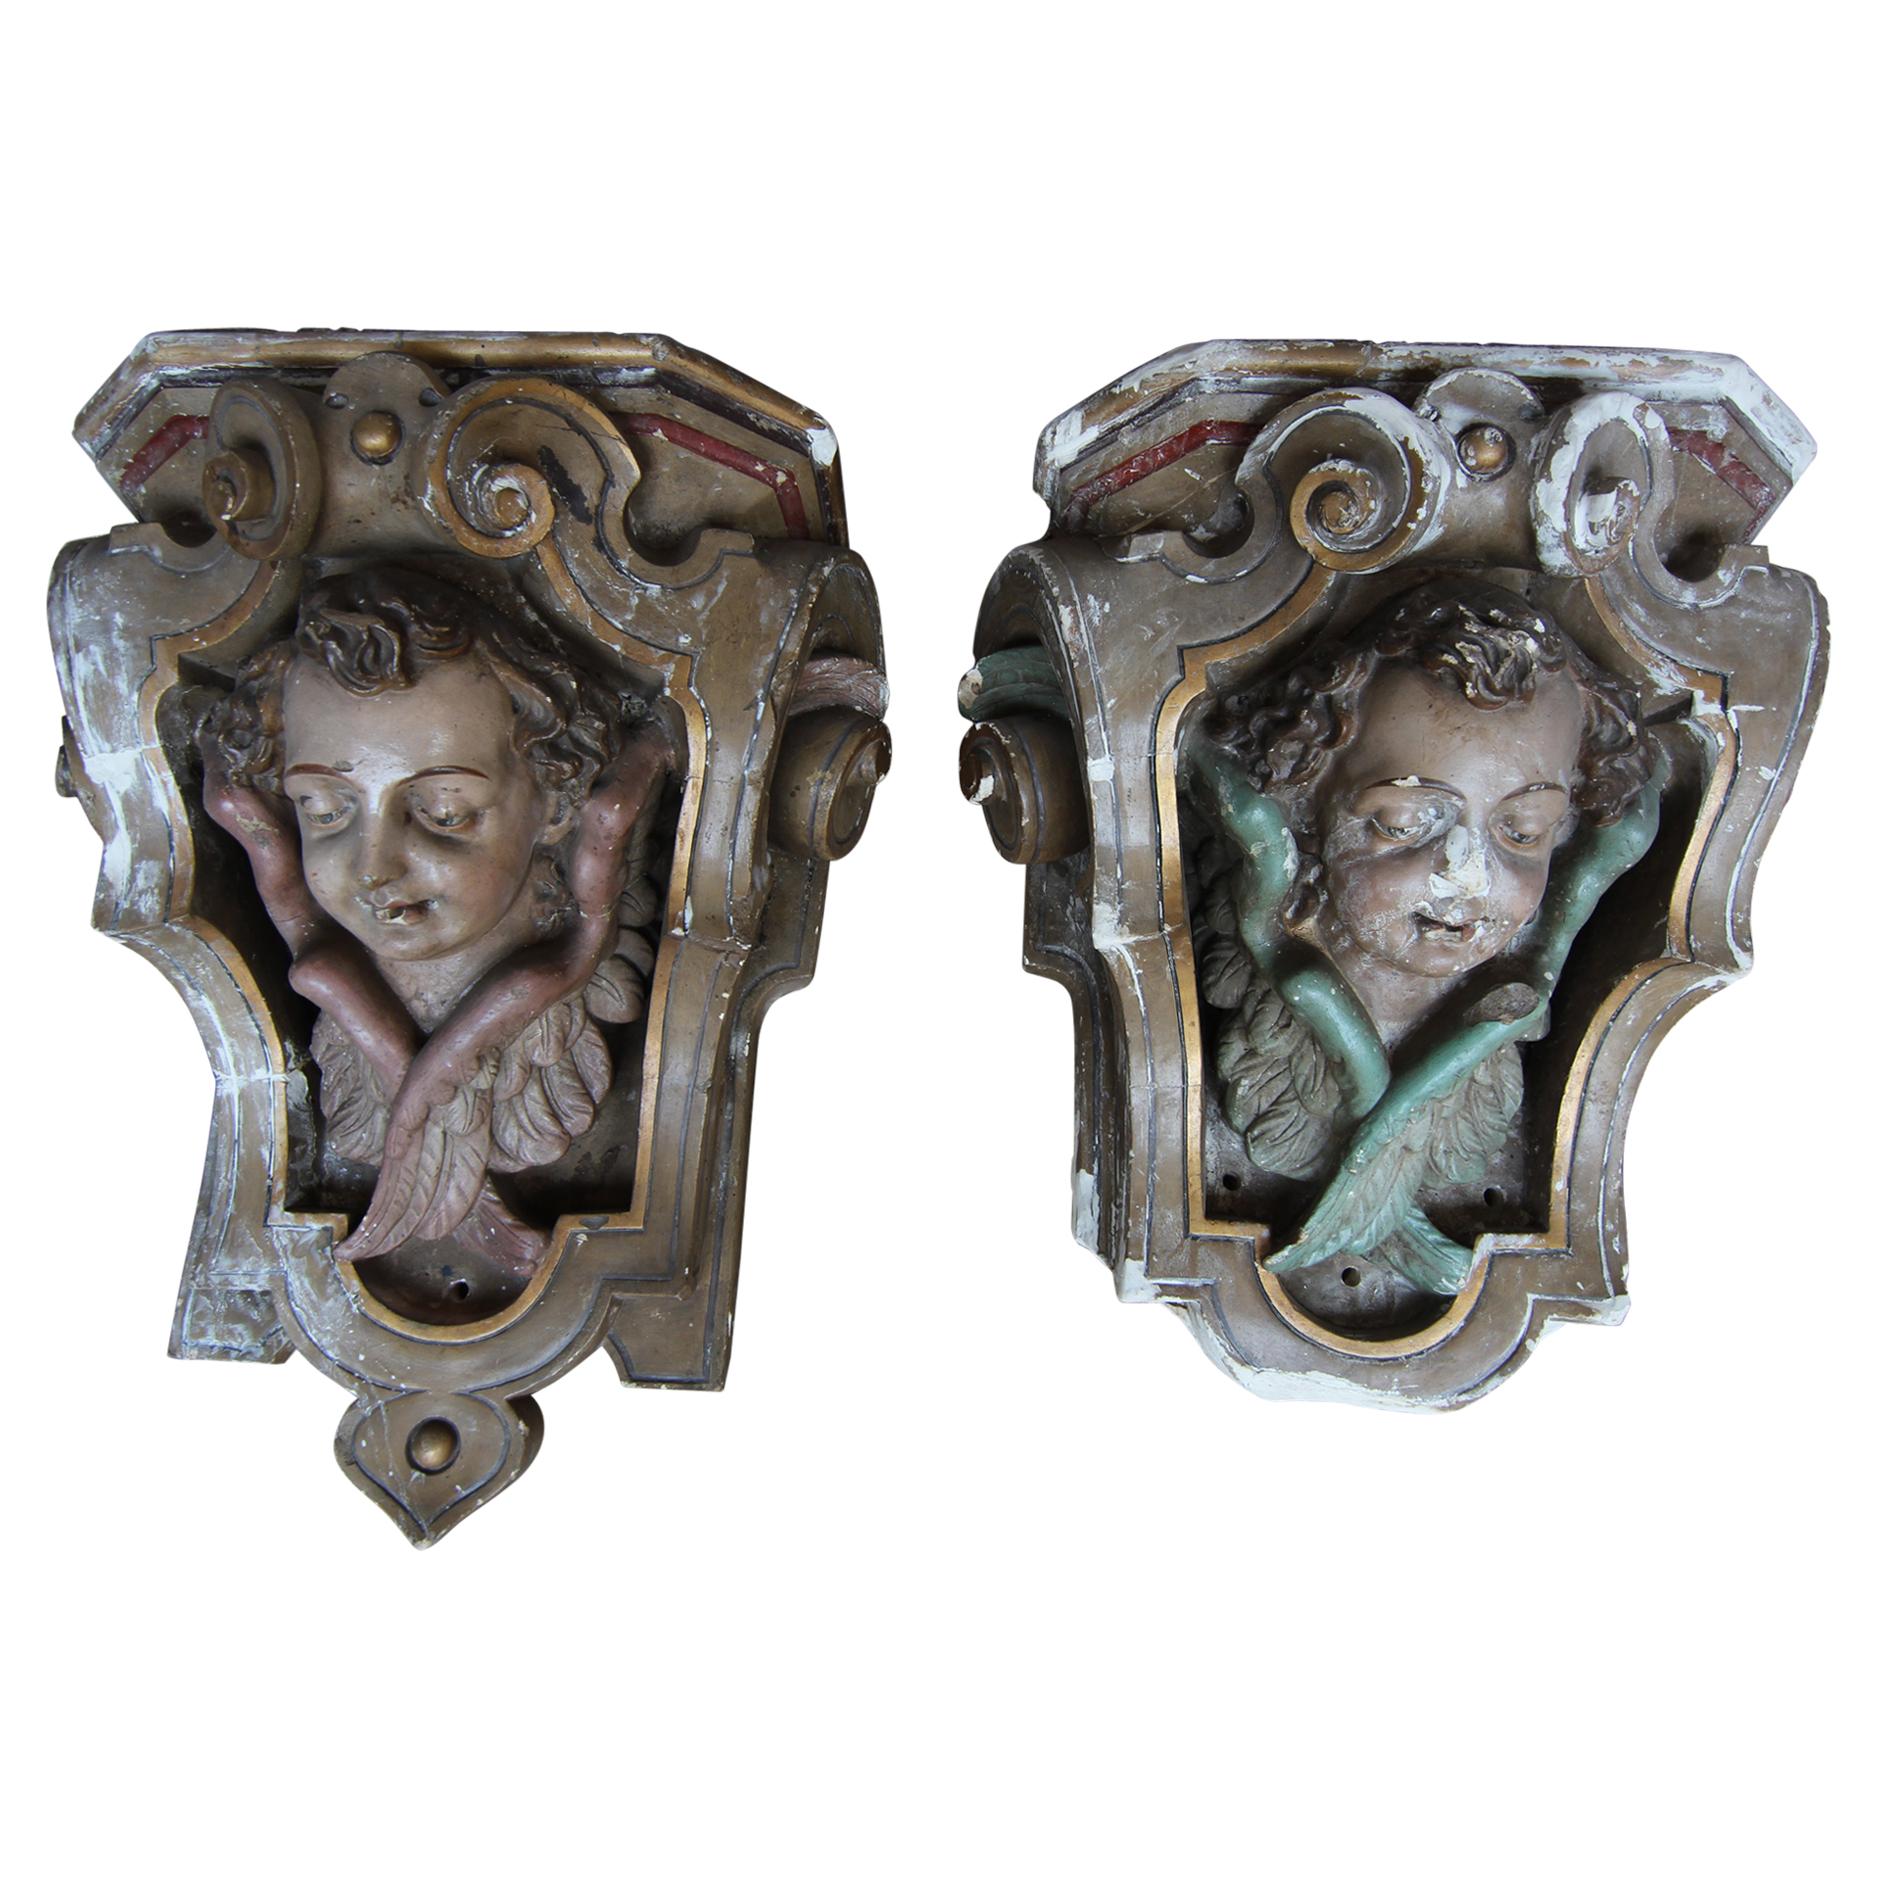 19th Century Rococo Revival Putti Wall Brackets made of Plaster, Set of 2 For Sale